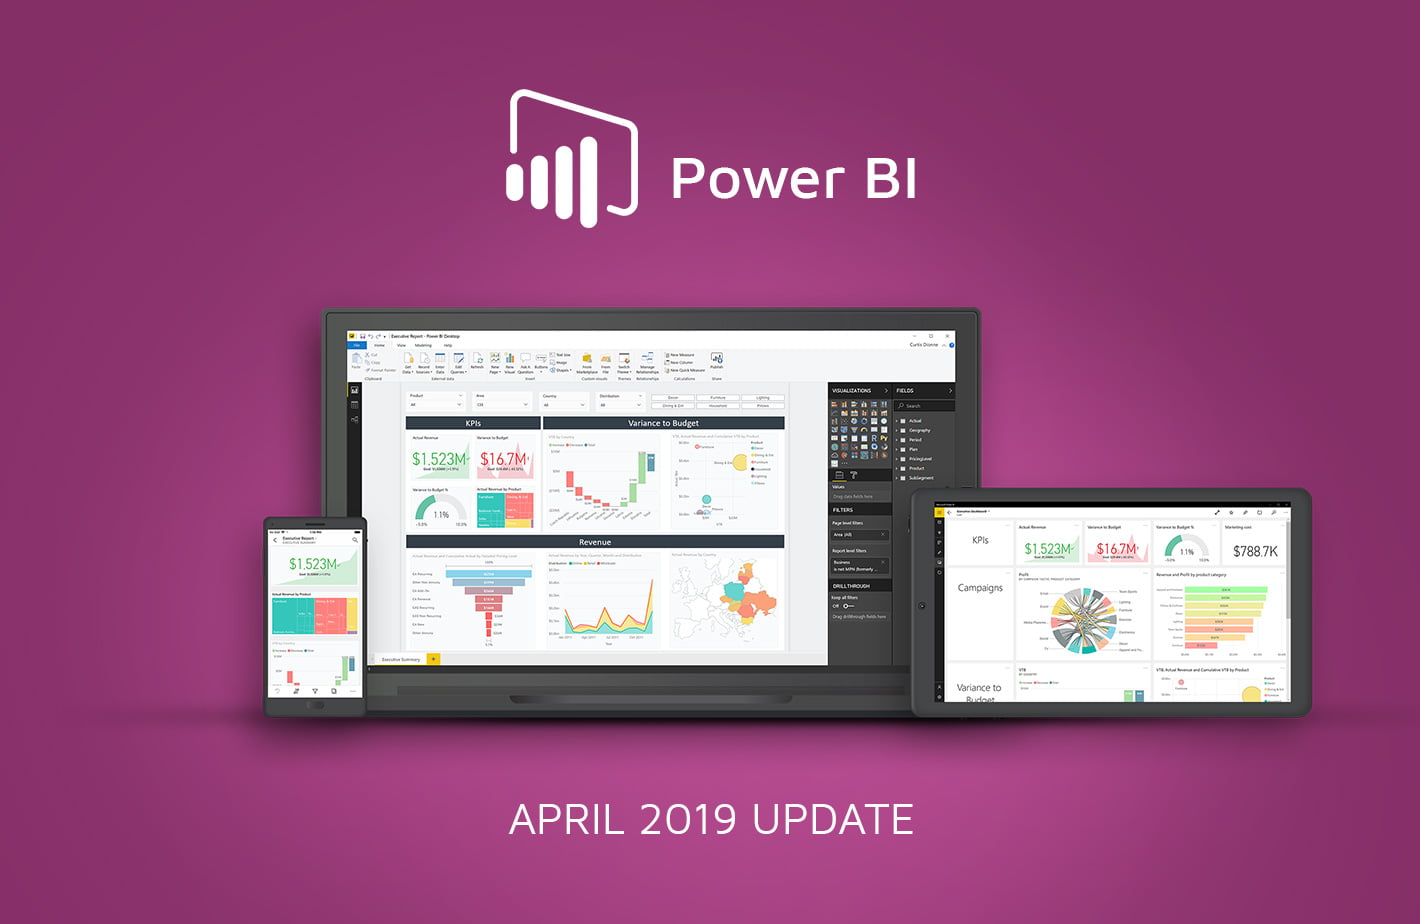 What's new in PowerBi April Update